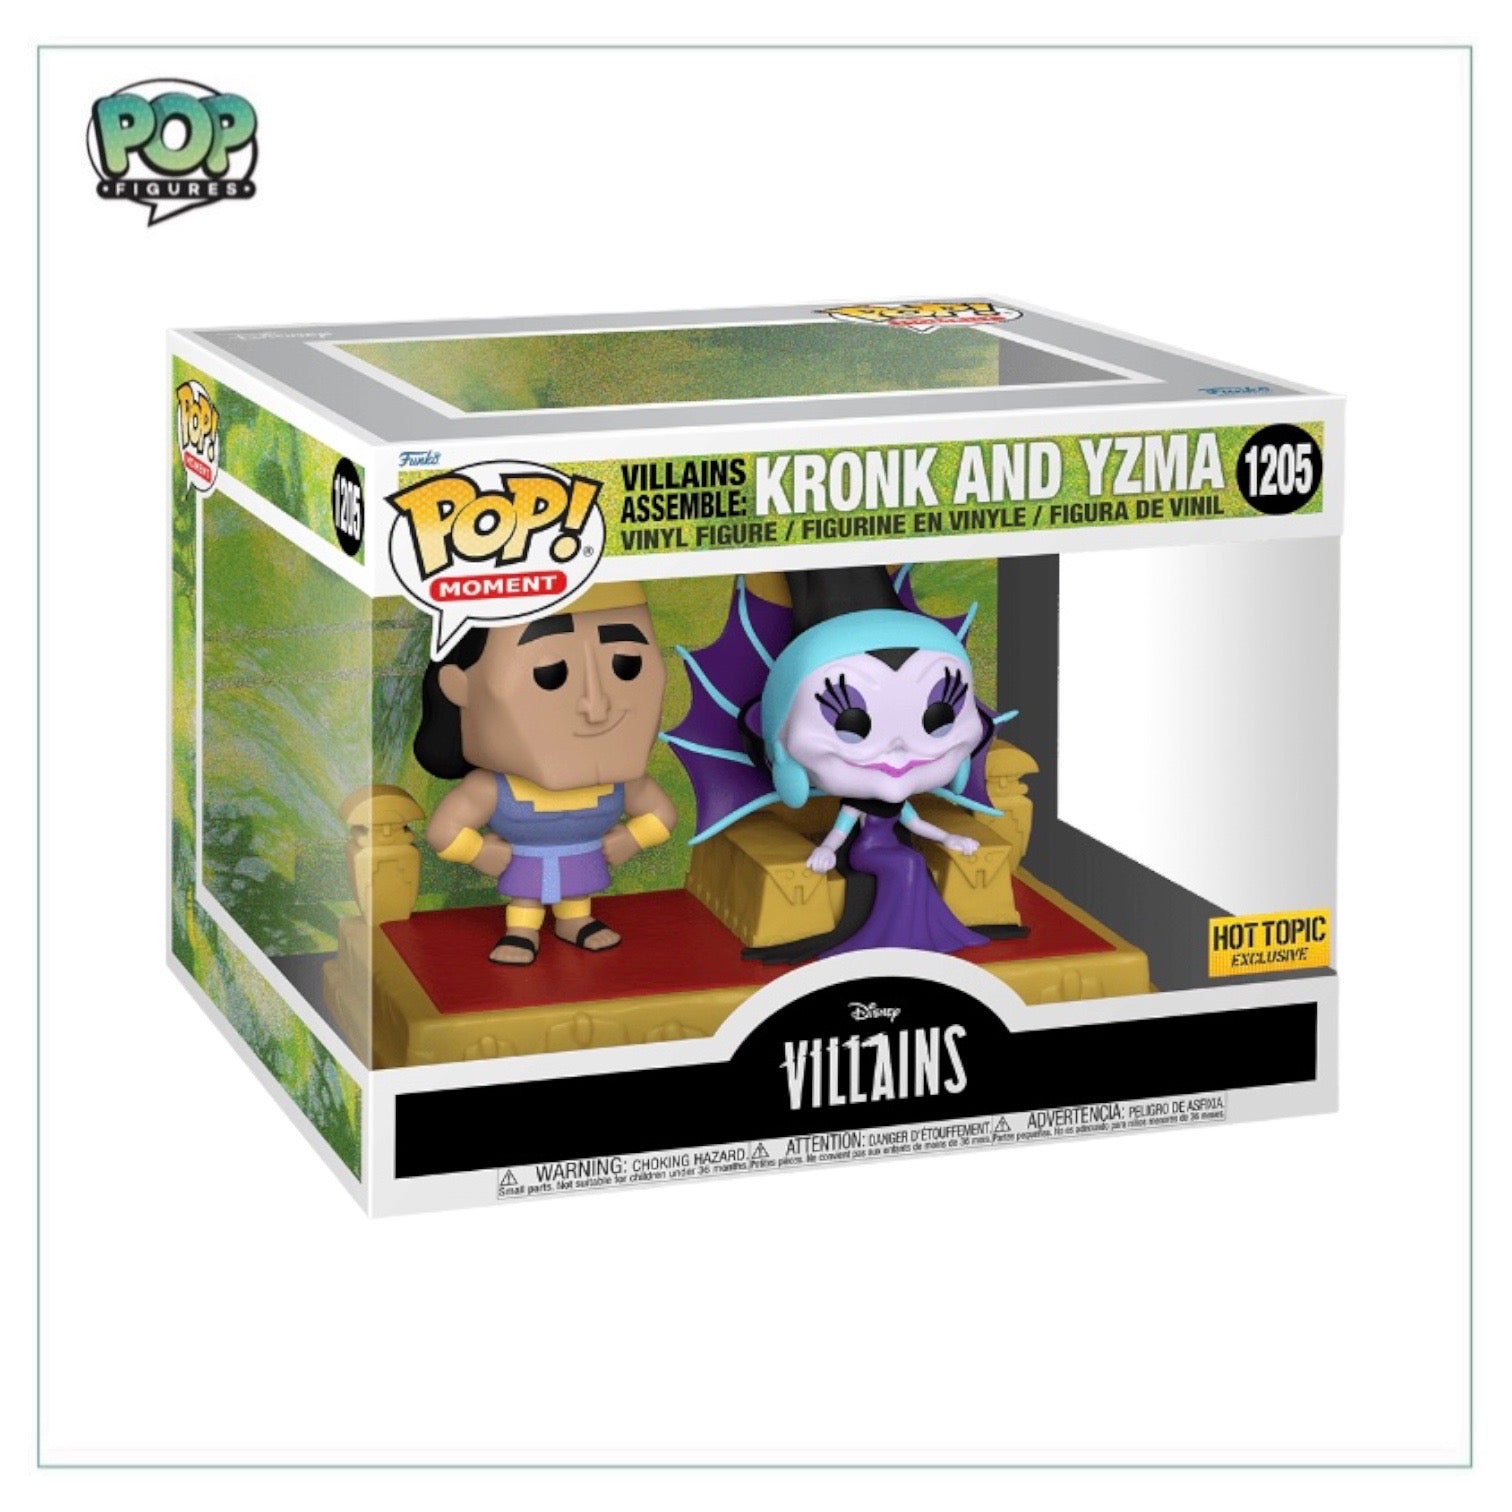 Villains Assemble: Kronk and Yzma #1205 Funko Pop Moment! - Disney Villains - Hot Topic Exclusive - Angry Cat